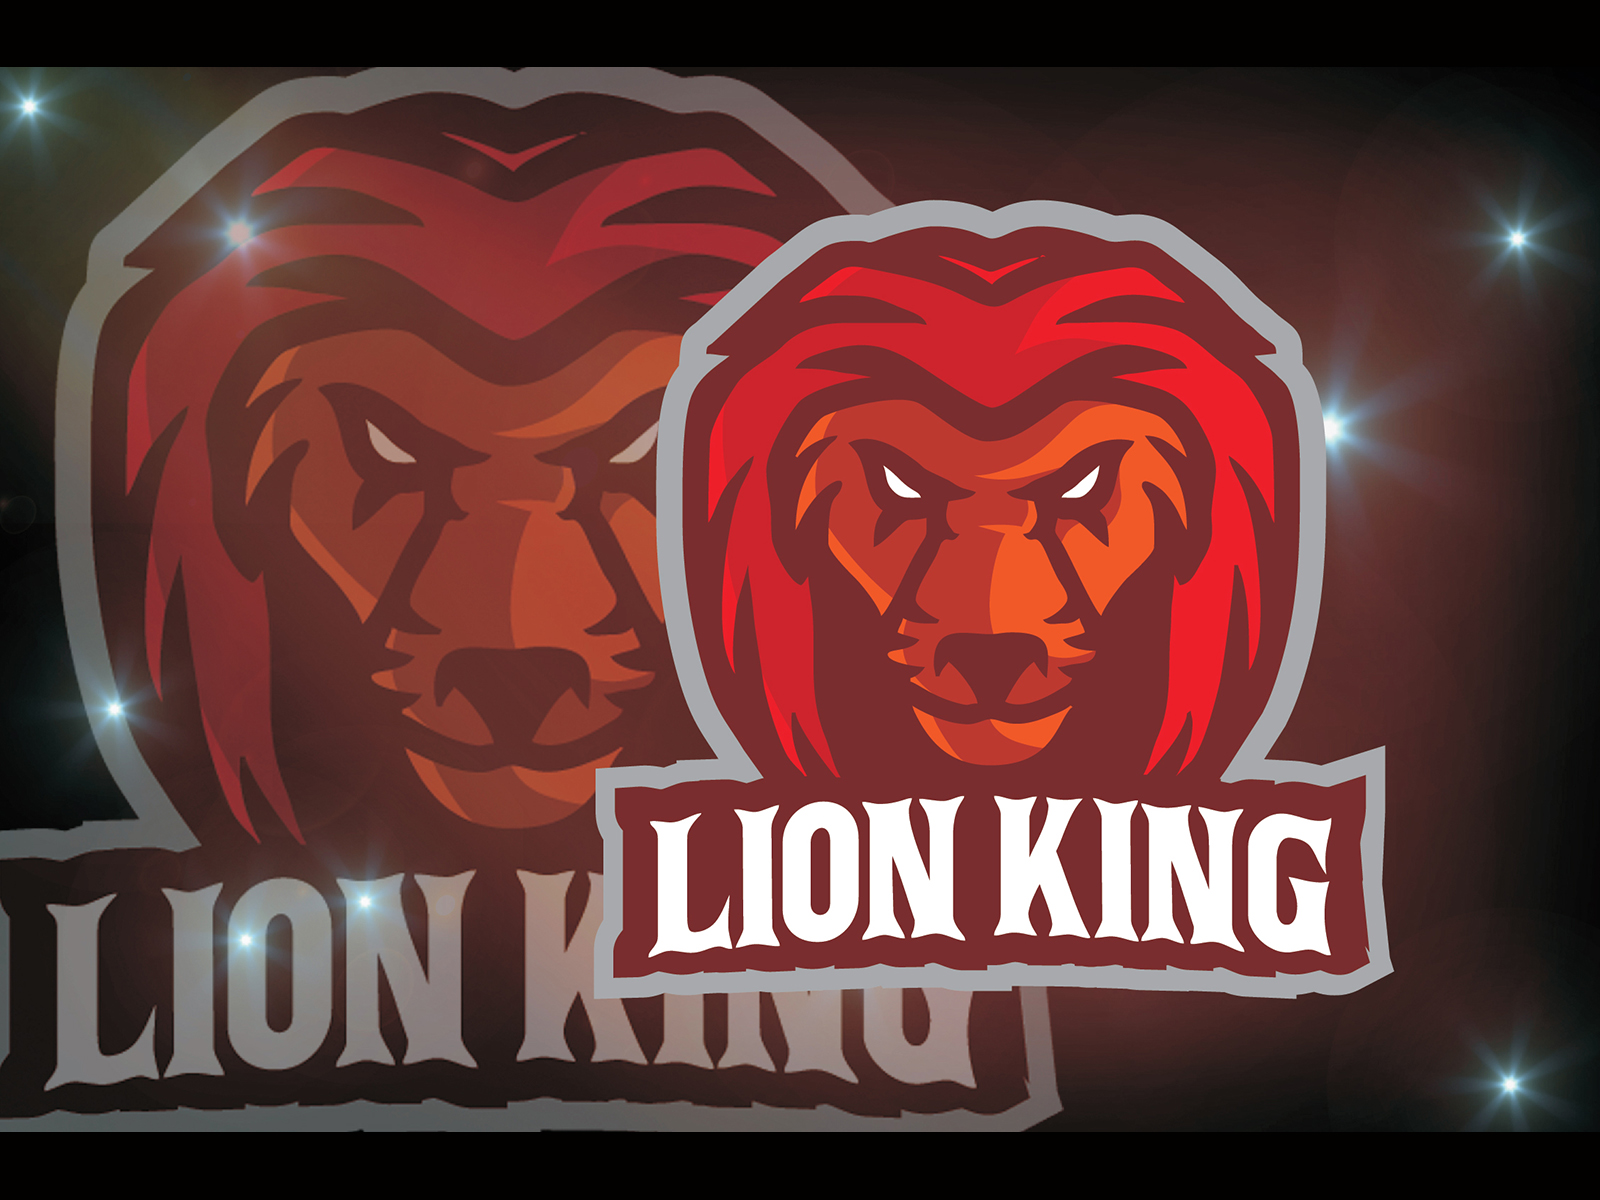 Download Free Lion King Logo Esport By Remarena On Dribbble PSD Mockup Template